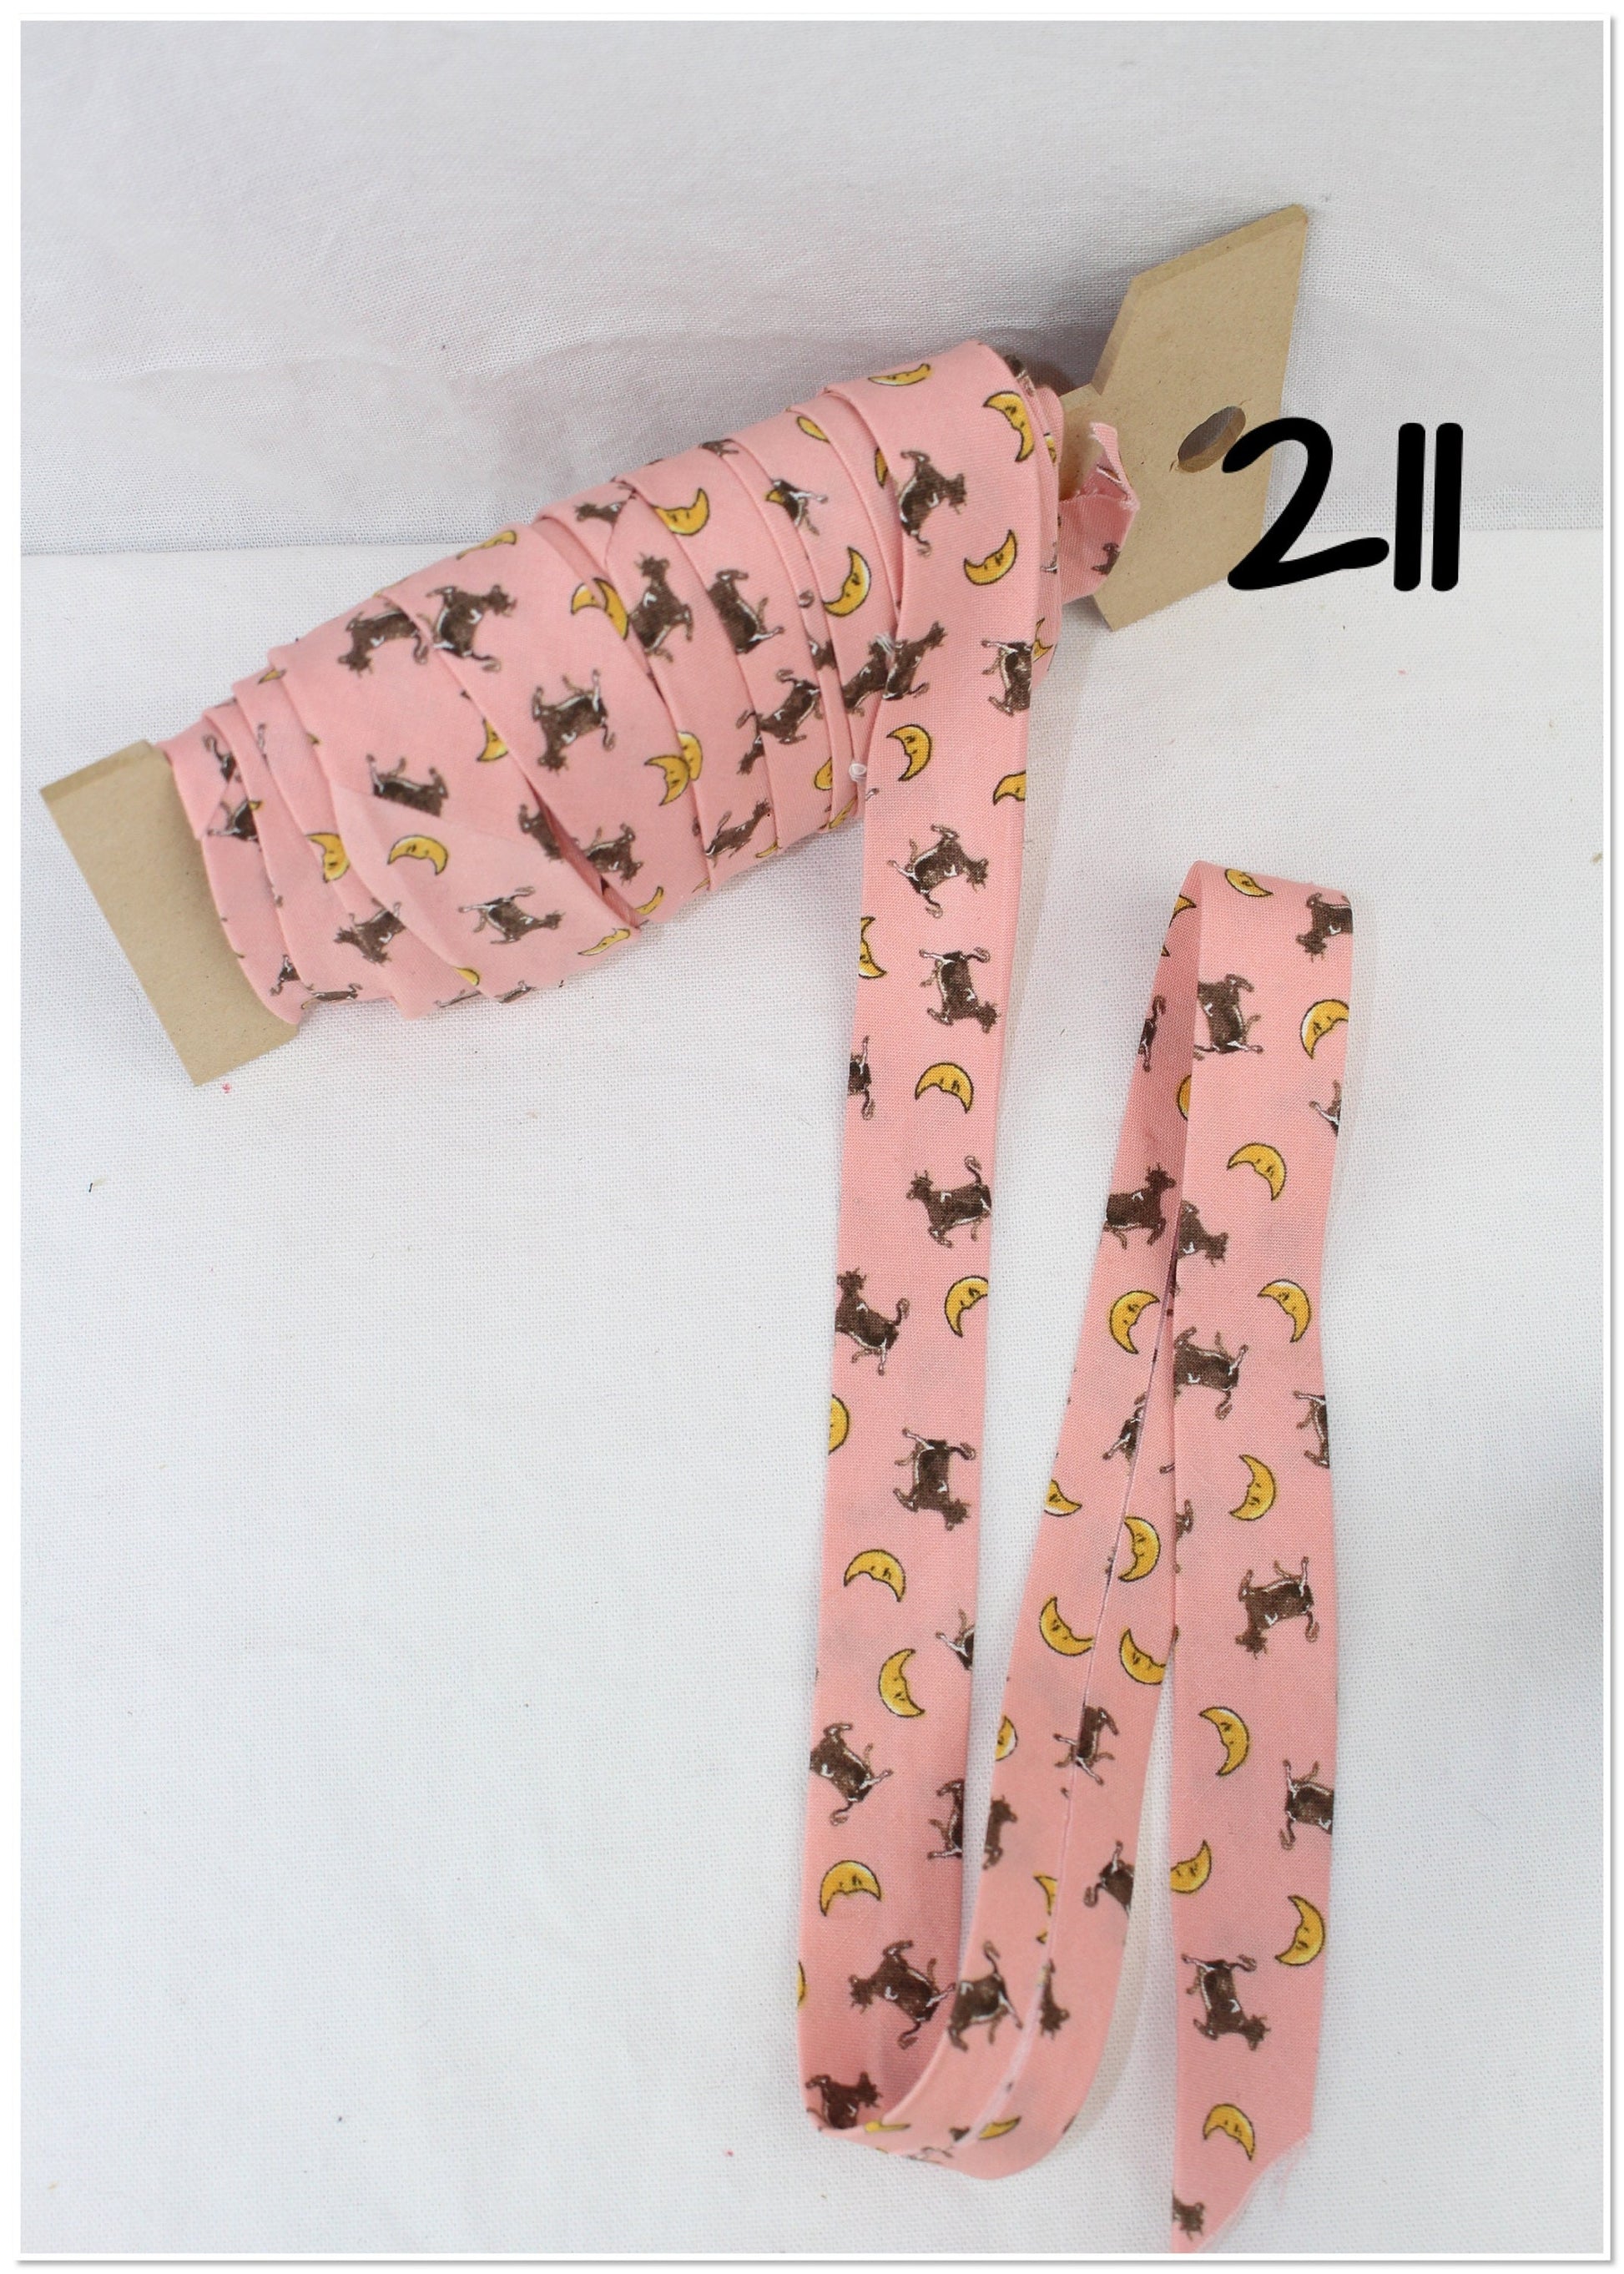 Bias Binding (Tape) 25mm, Cotton, Single Fold, cows and moon, kittens, lobsters, patterned. Fusible iron on available.